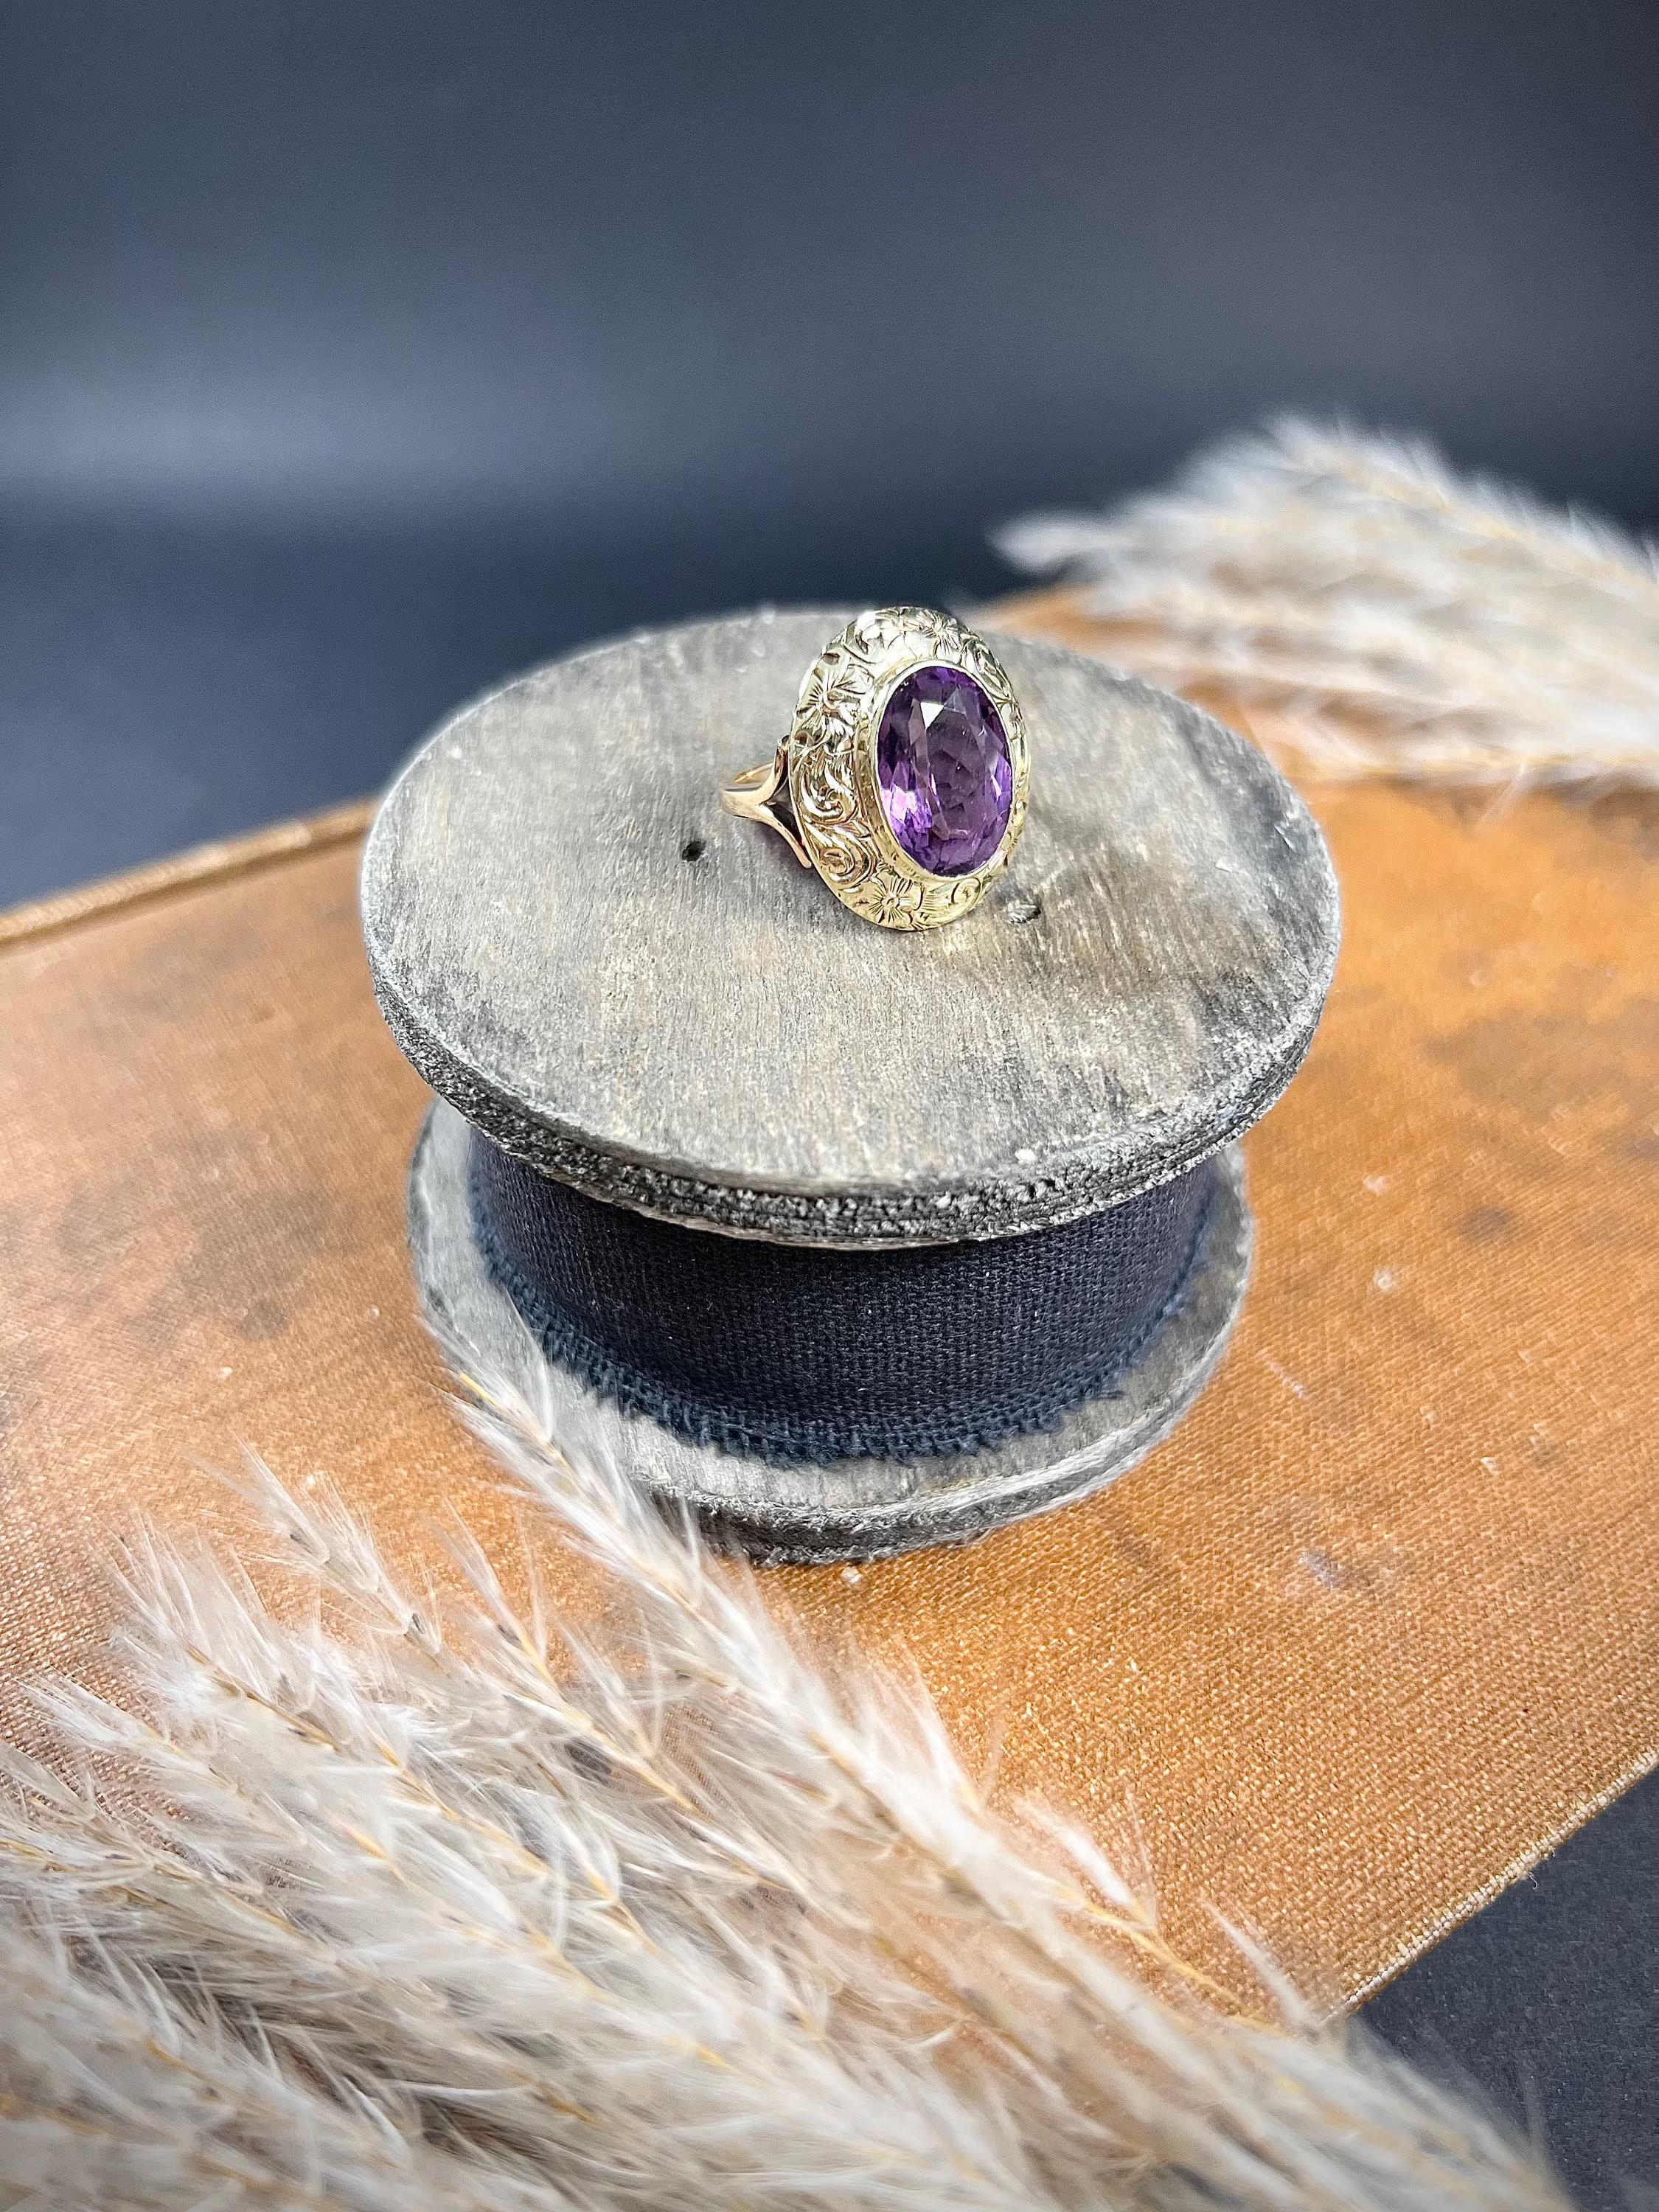 Antique Amethyst Ring

14ct Yellow & Rose Gold Tested 

Circa 1880

A fabulous, Victorian dress ring. Features a lovely, large, faceted, oval amethyst stone. The setting is yellow gold with gorgeous hand carved, floral detailing. Mounted on a 1.6mm